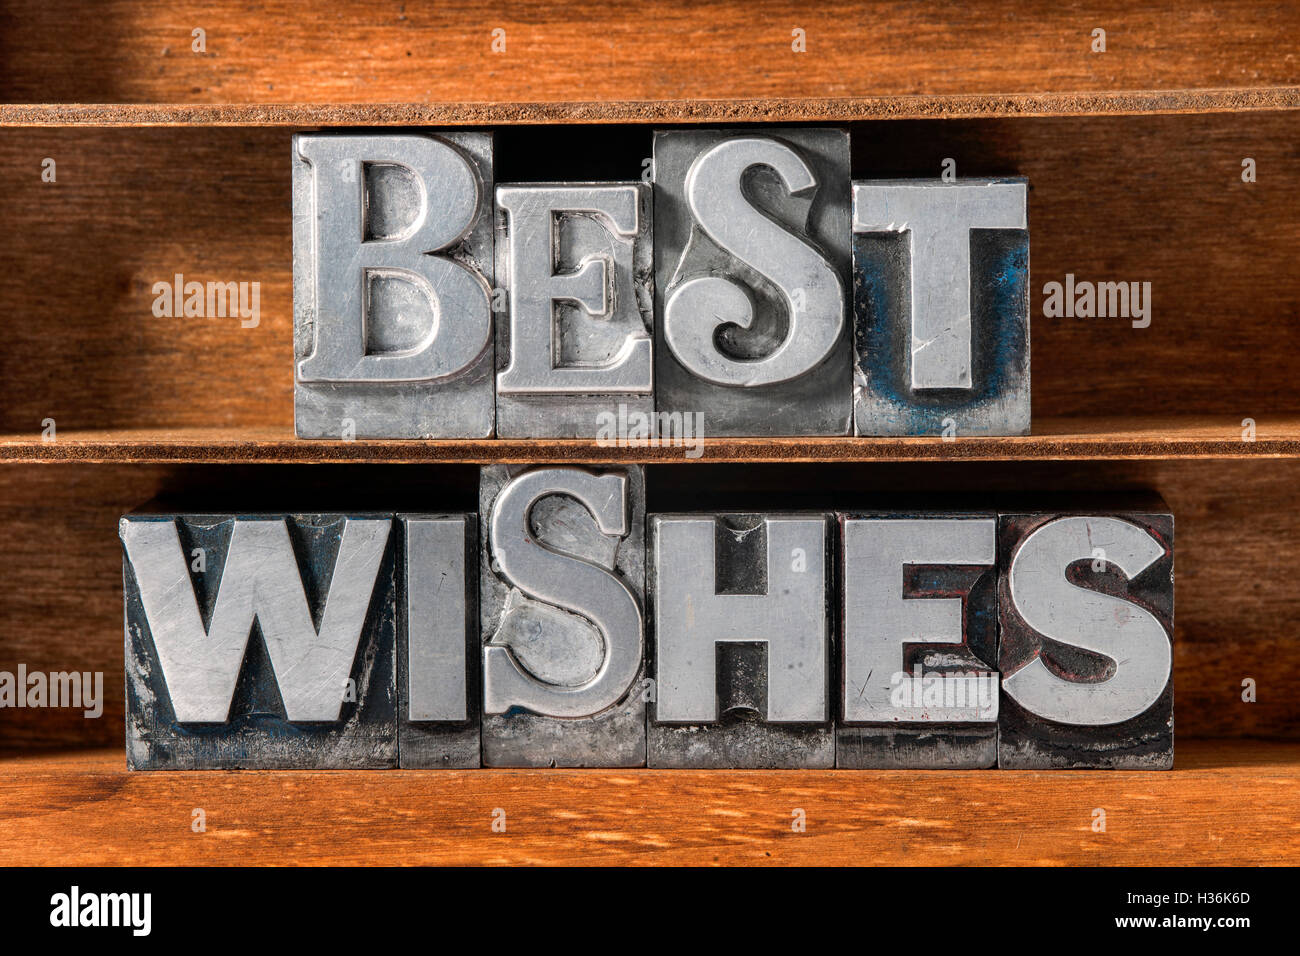 best wishes phrase made from metallic letterpress type on wooden tray Stock Photo